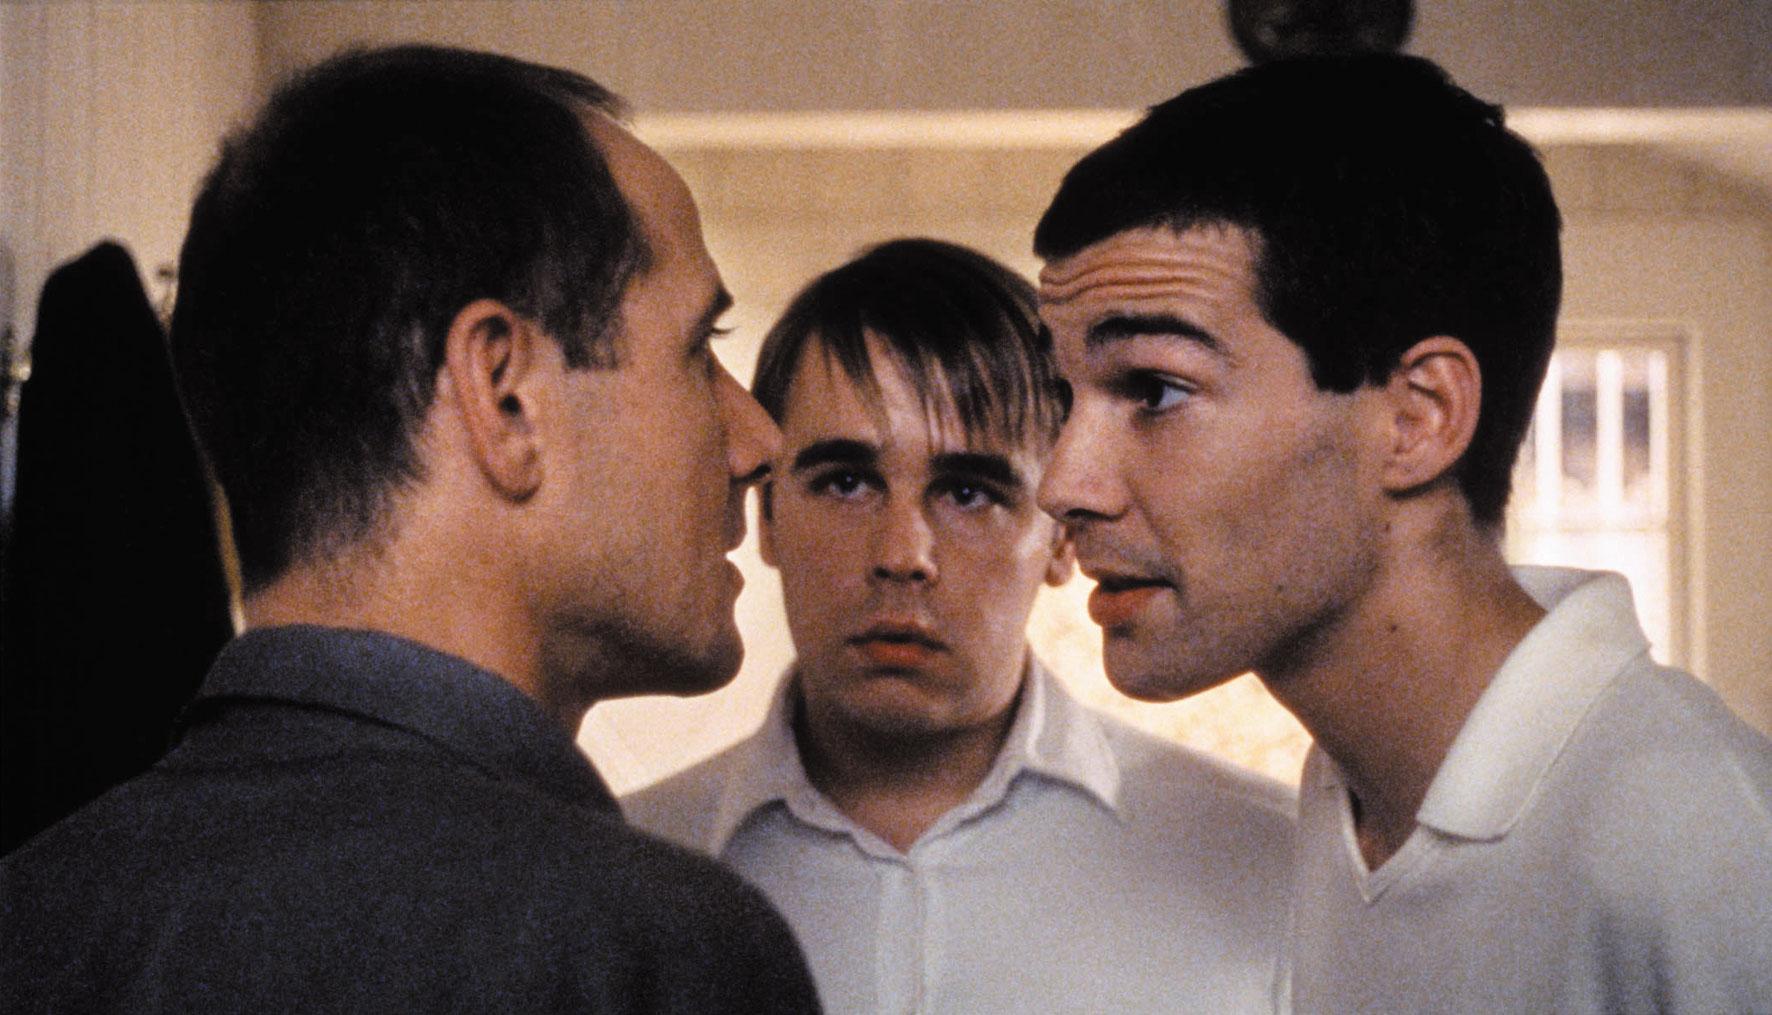 Surrender to the Void: Funny Games (1997 film)